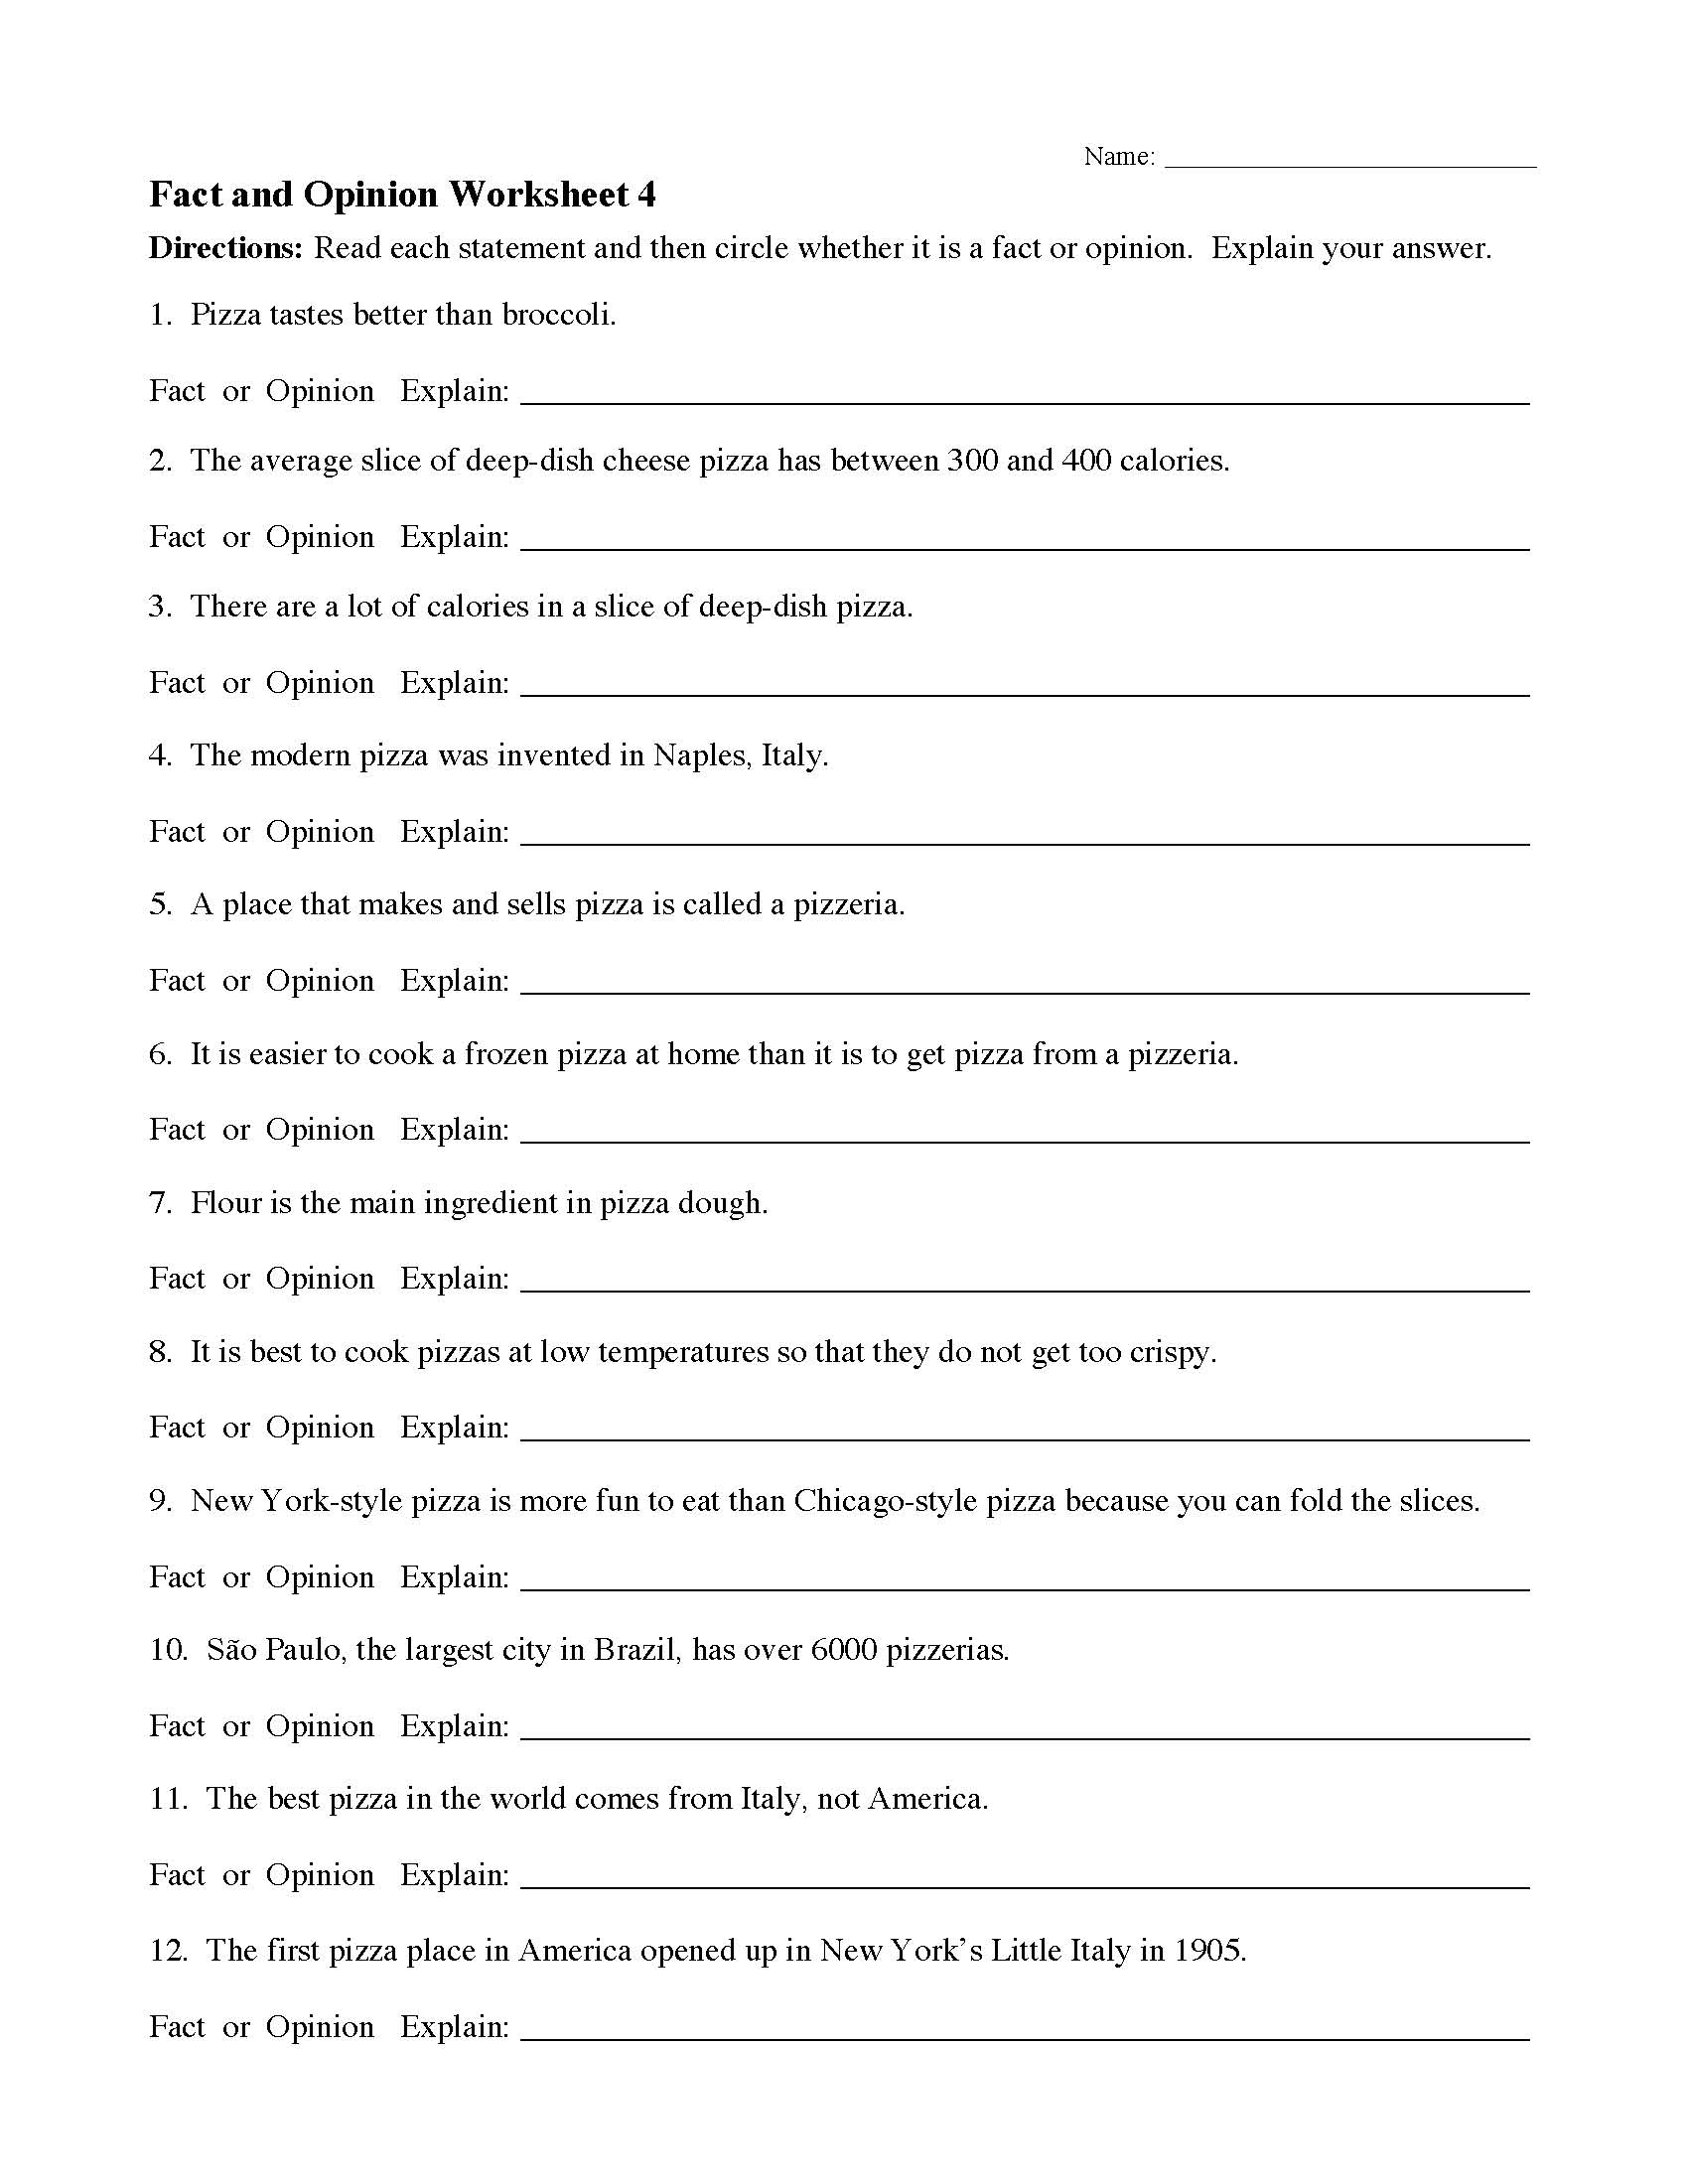 fact-and-opinion-worksheet-4-reading-activity